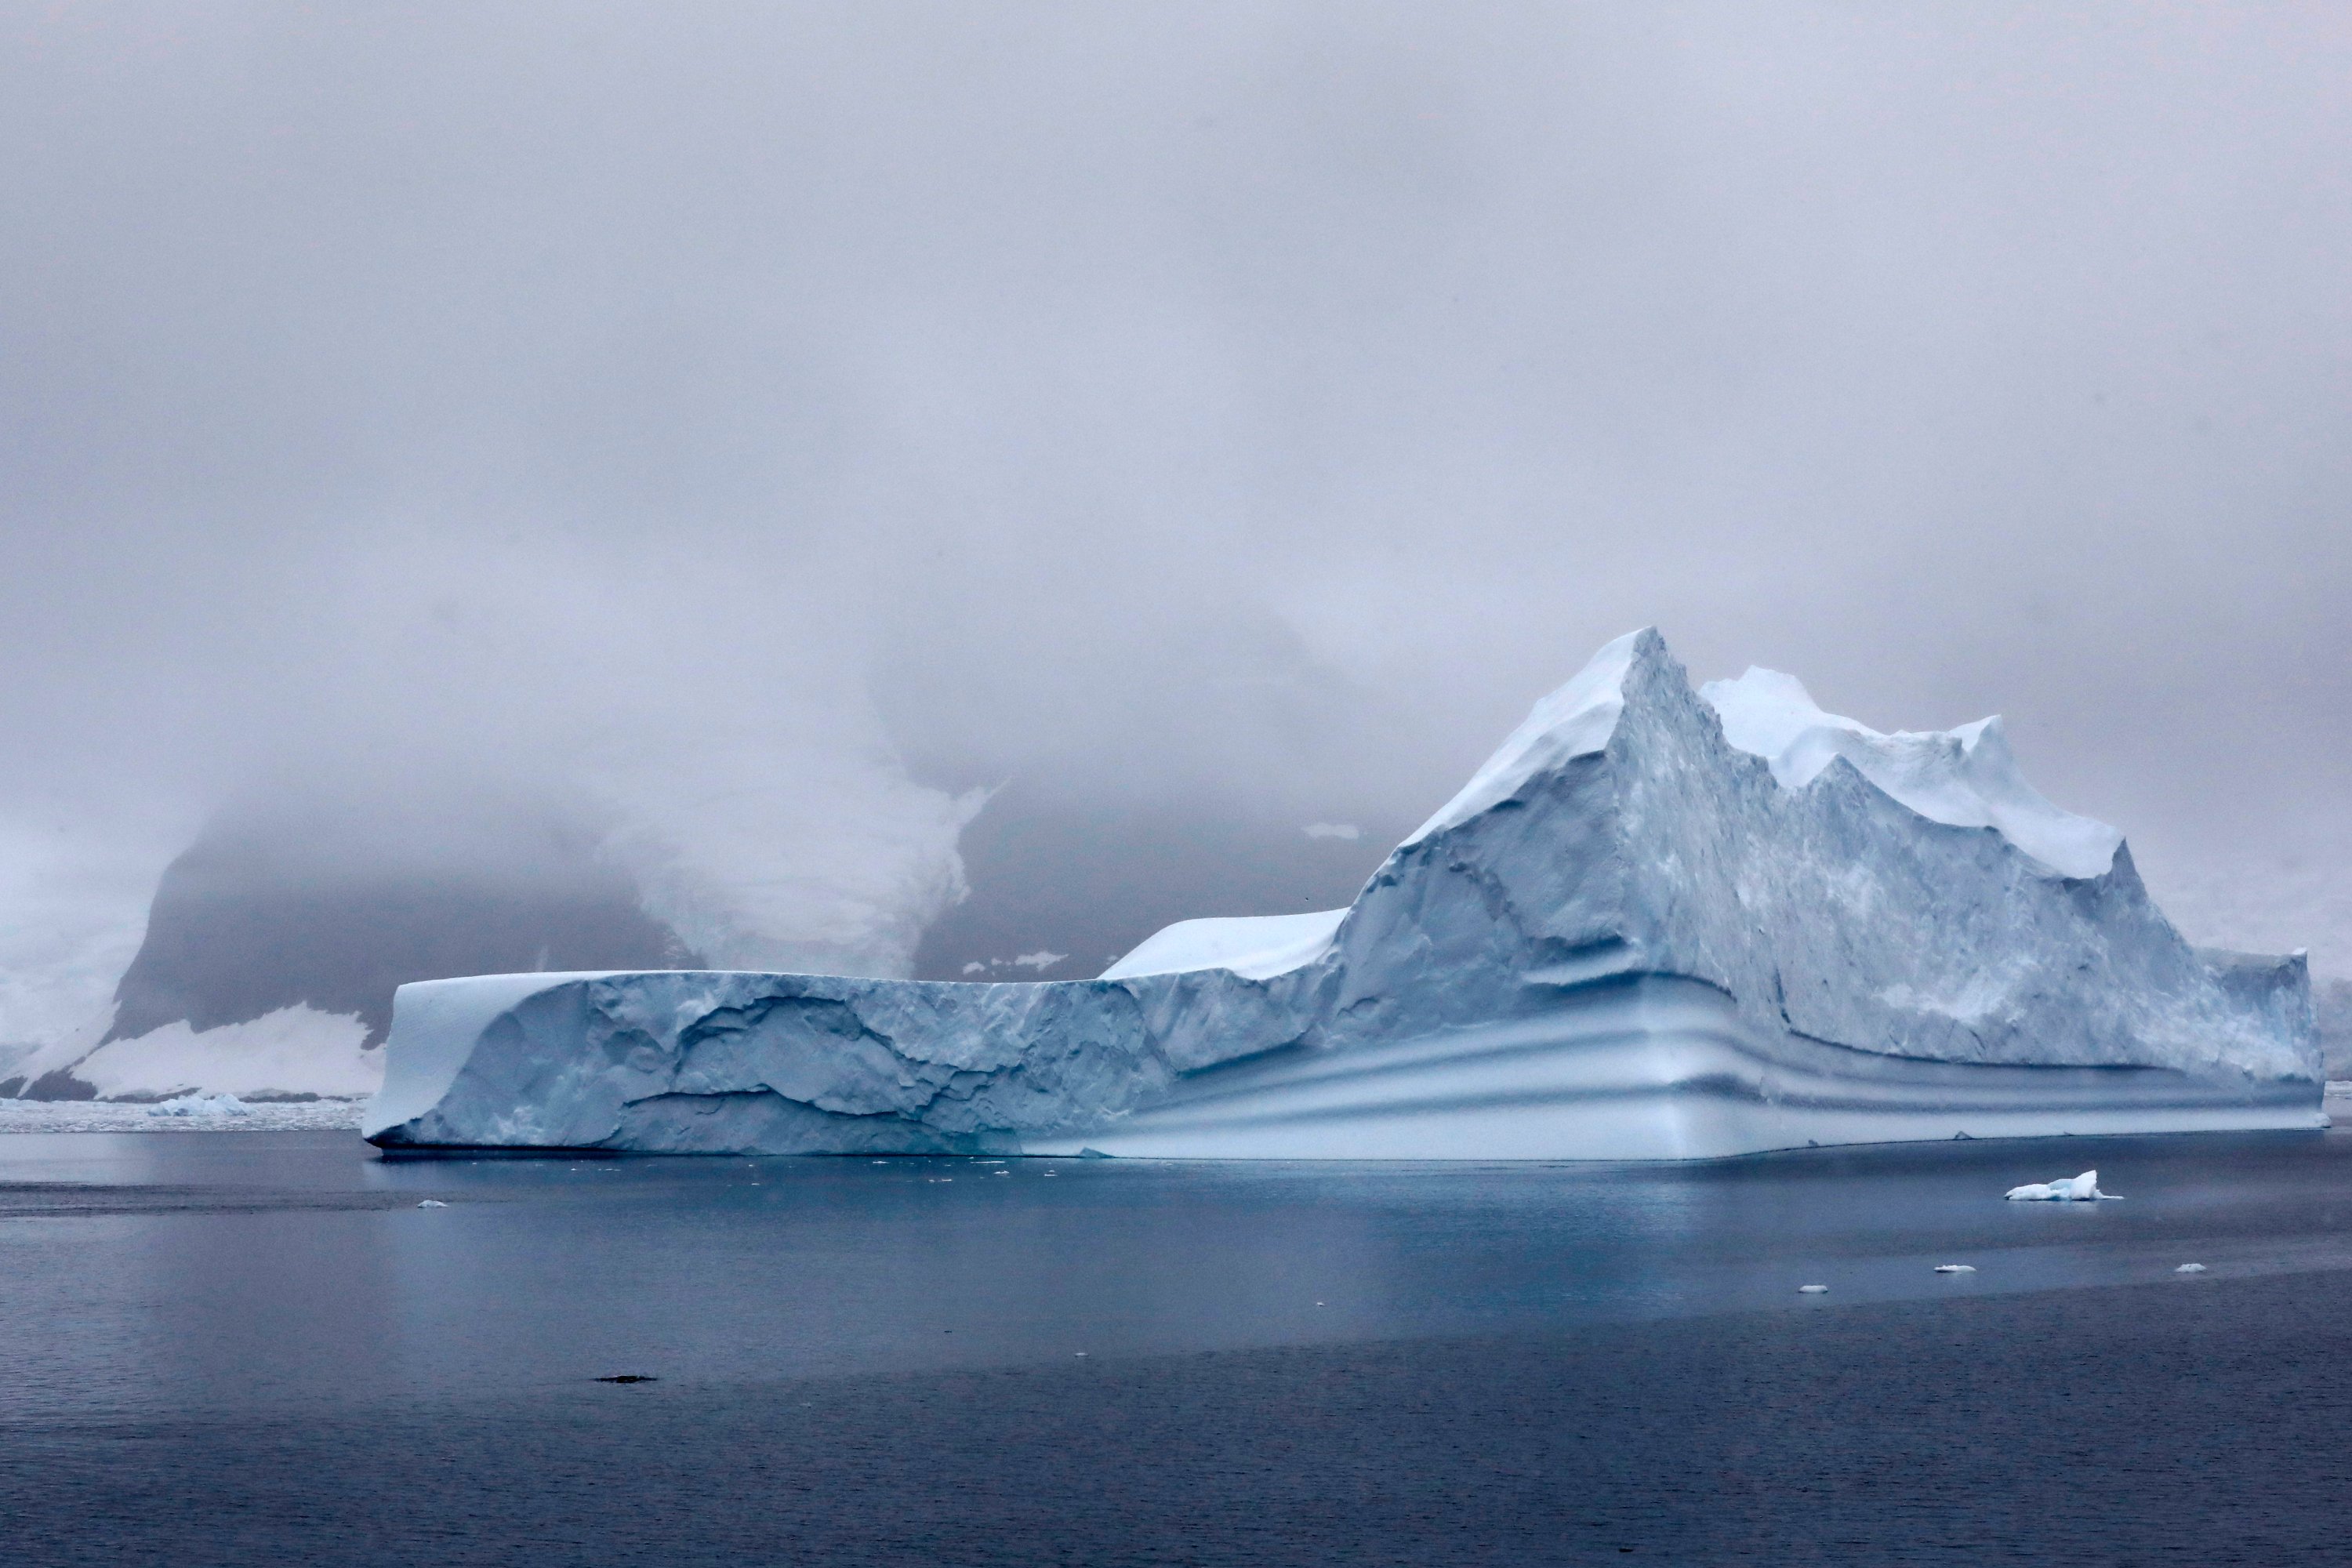 The icy landscape of Antarctica is truly breathtaking. (Photo by Hayrettin Bektaş)